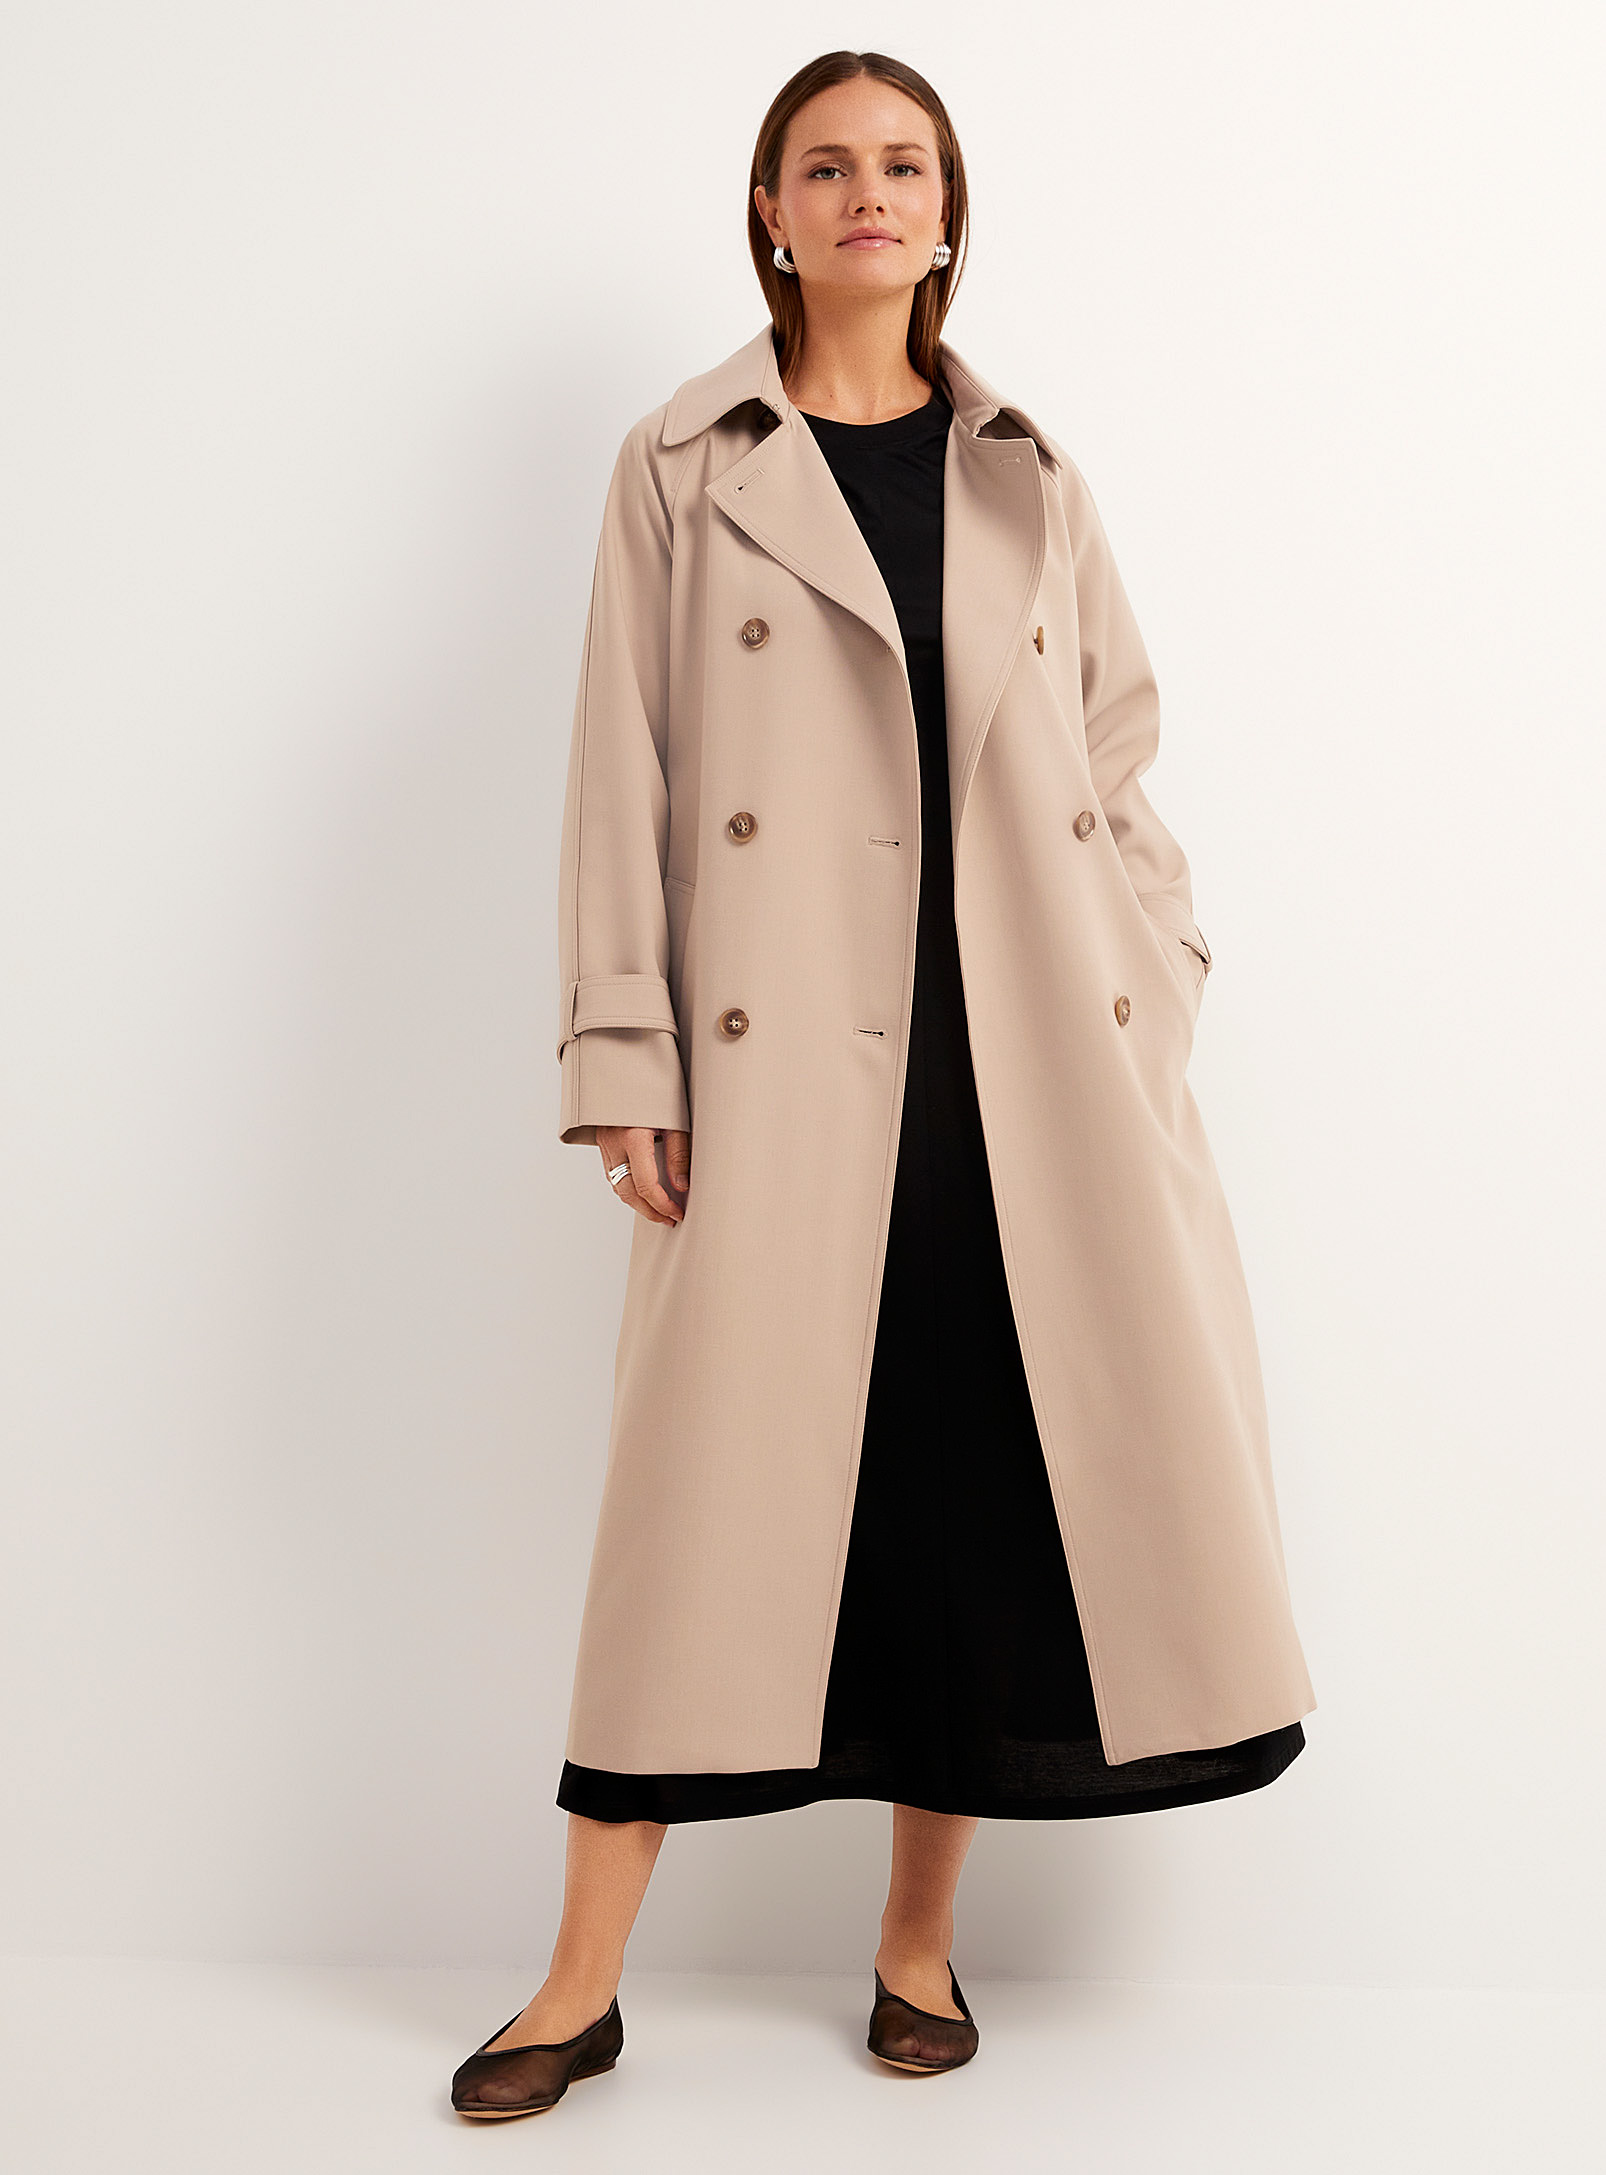 Rue Sophie - Women's Zahra marble button long trench coat